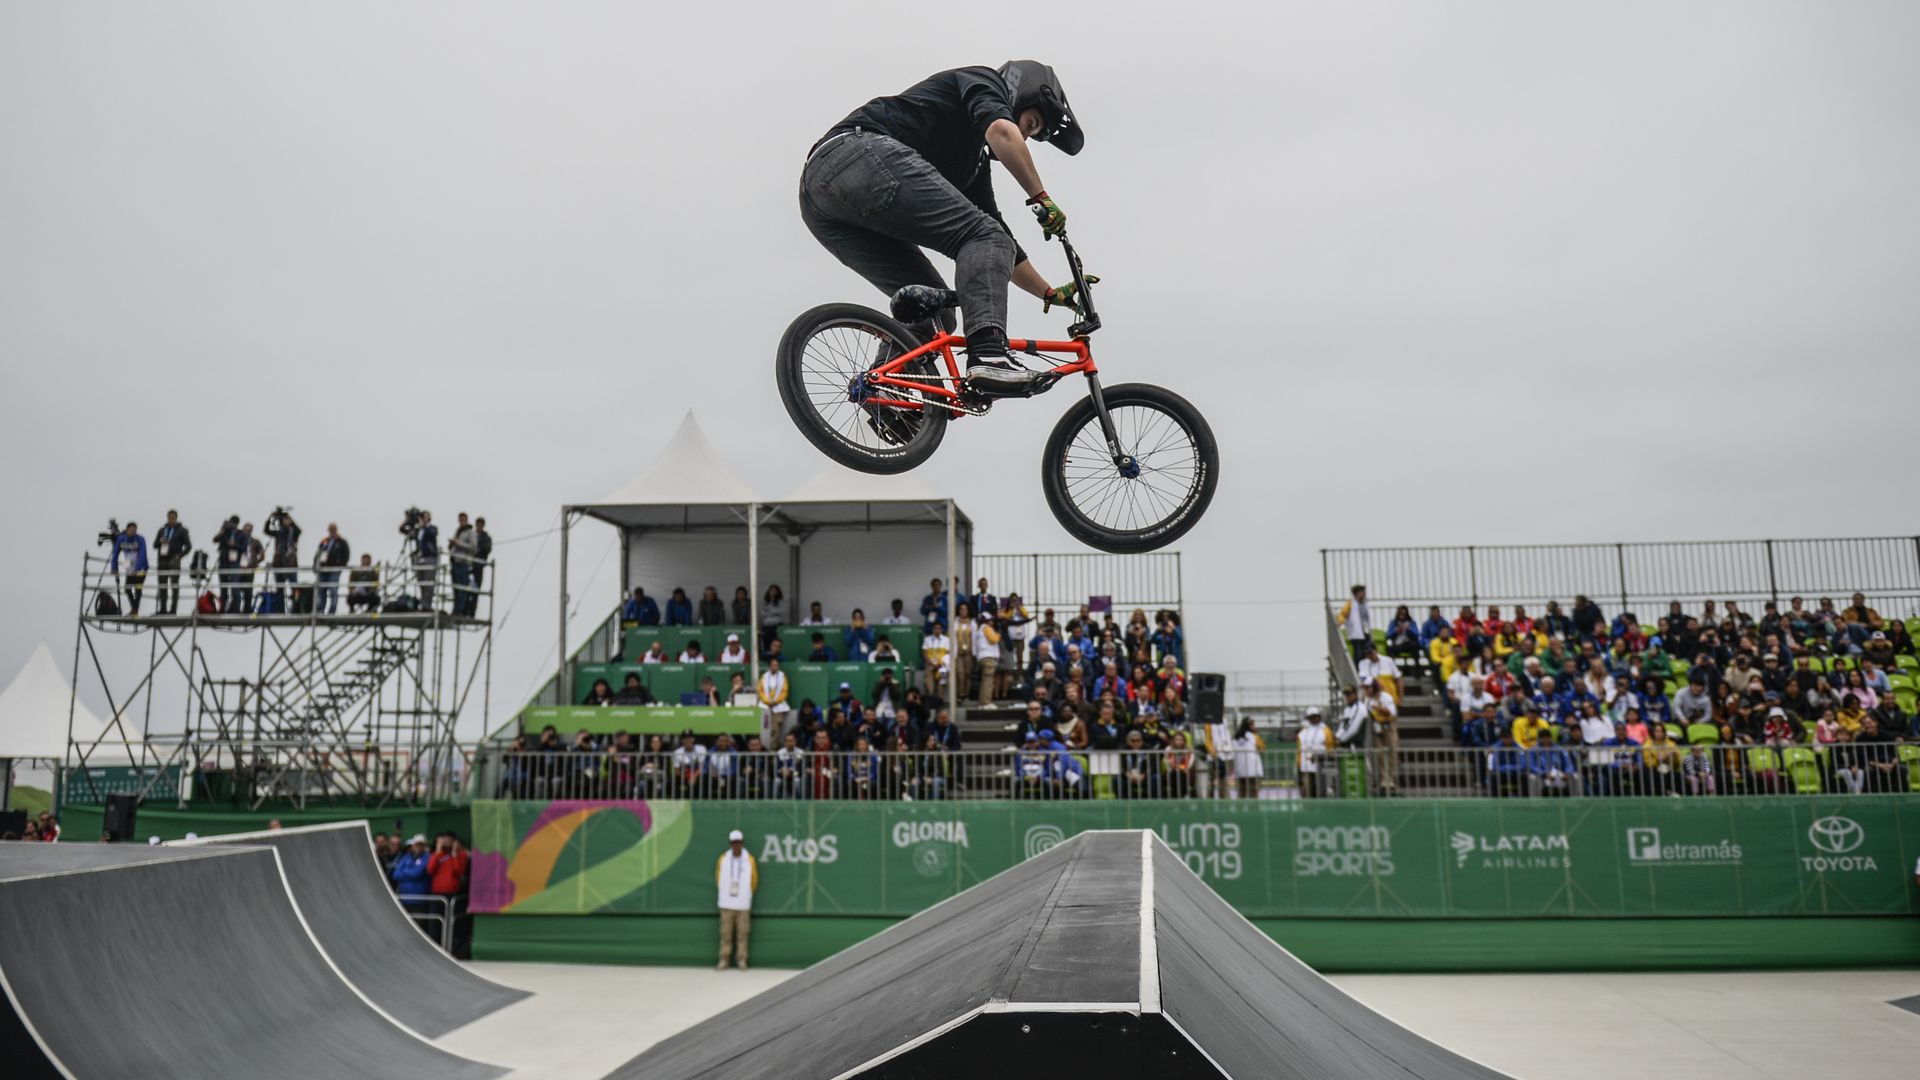 US Hannah Roberts competes in the Cycling BMX Women's Freestyle Final during the Lima 2019 Pan-American Games in Lima on August 11, 2019.